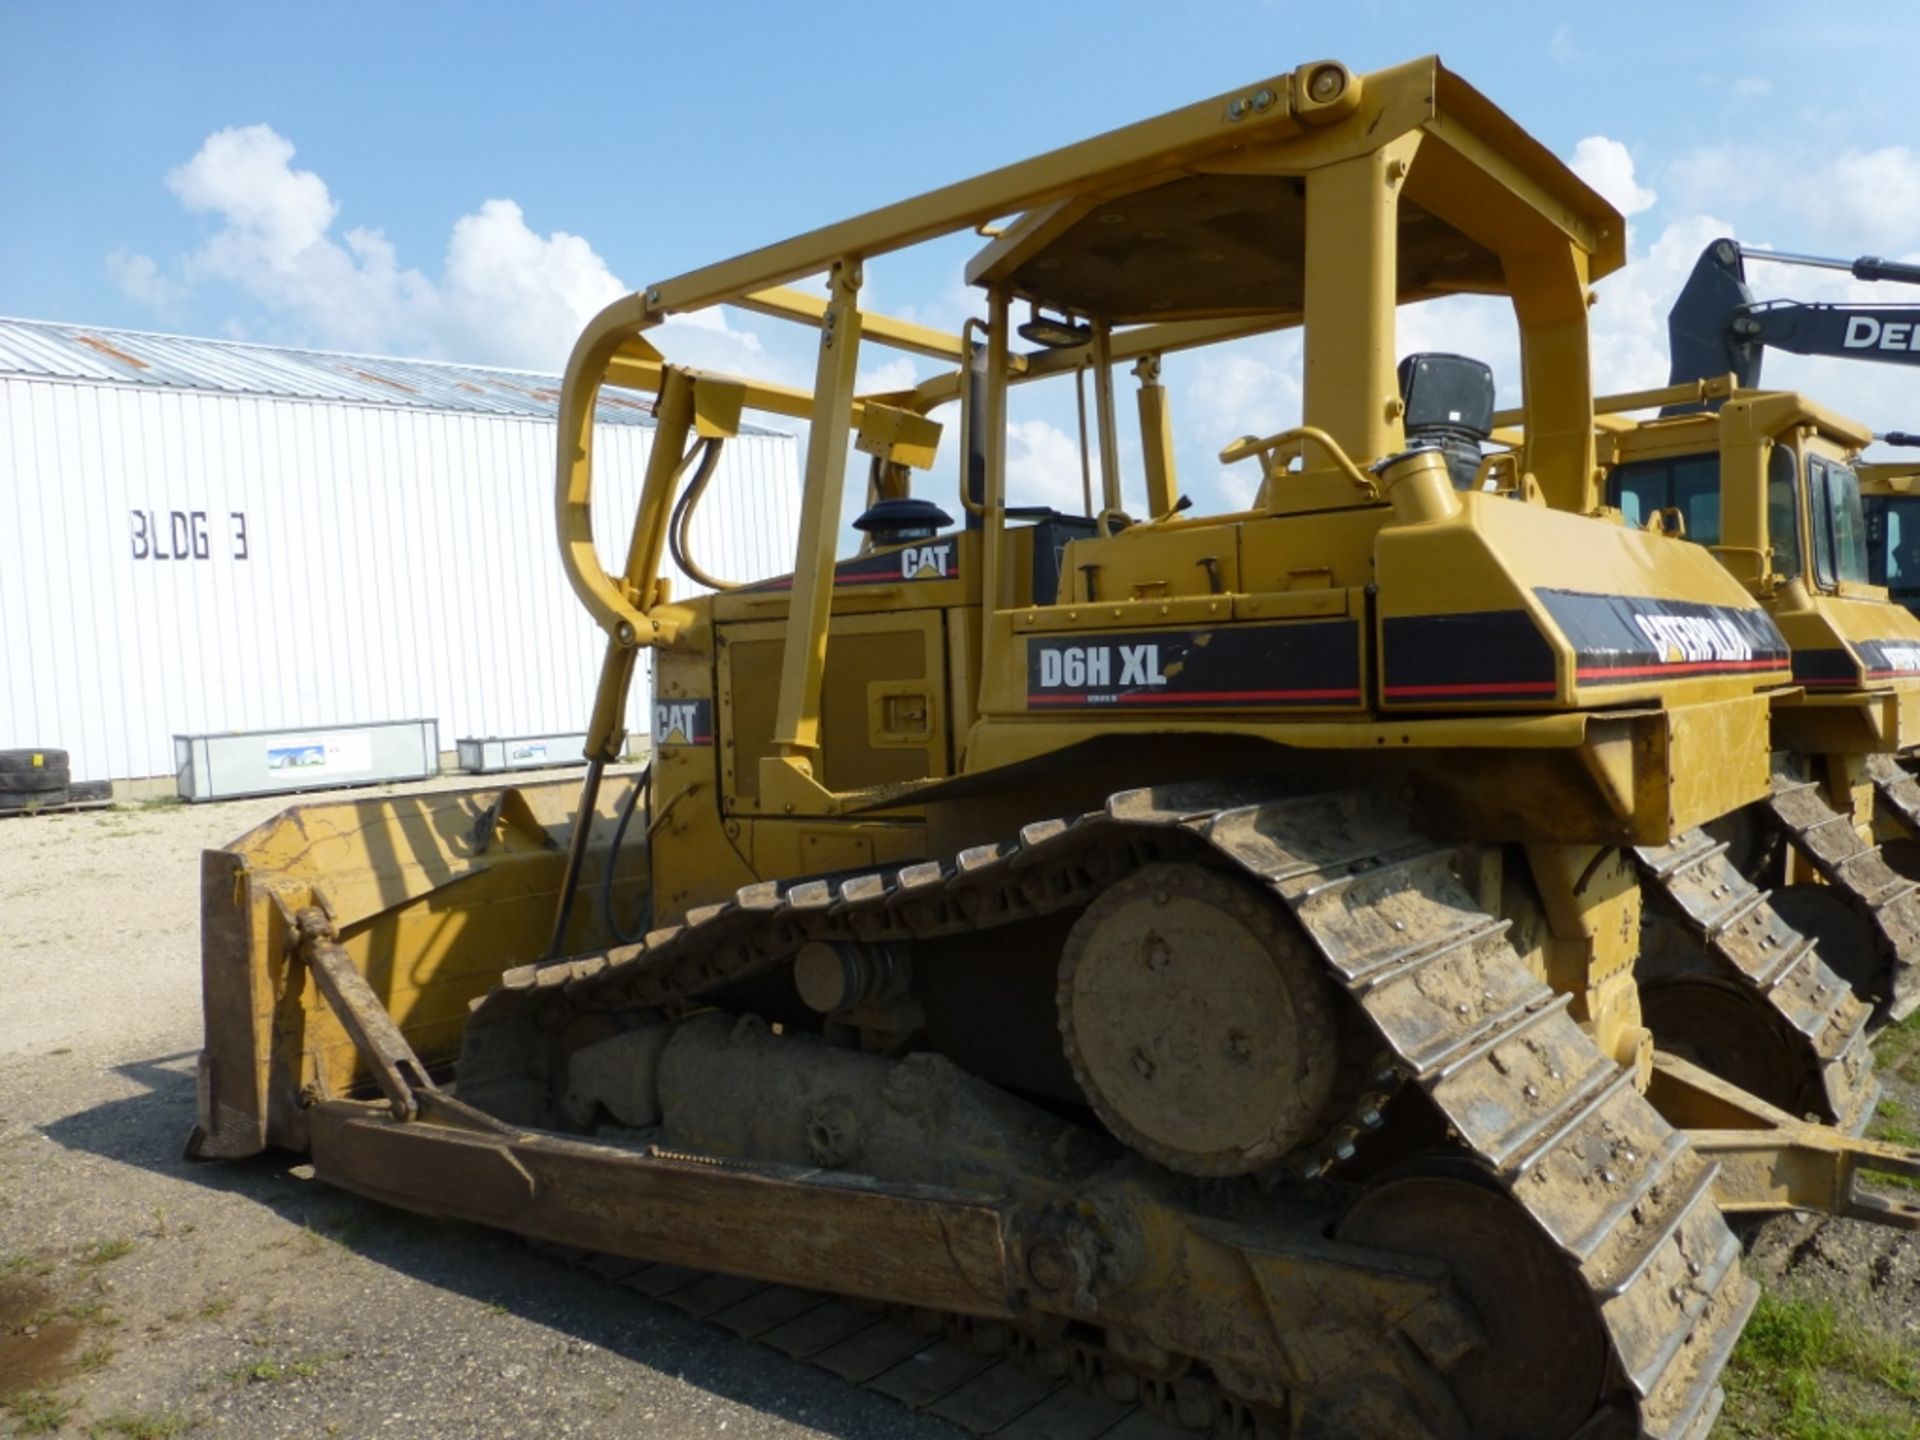 CAT D6H XL Series II, open ROPS, 30" pad. 139" blade. 17736 unverified hours. se:9kj0776 - Image 13 of 17